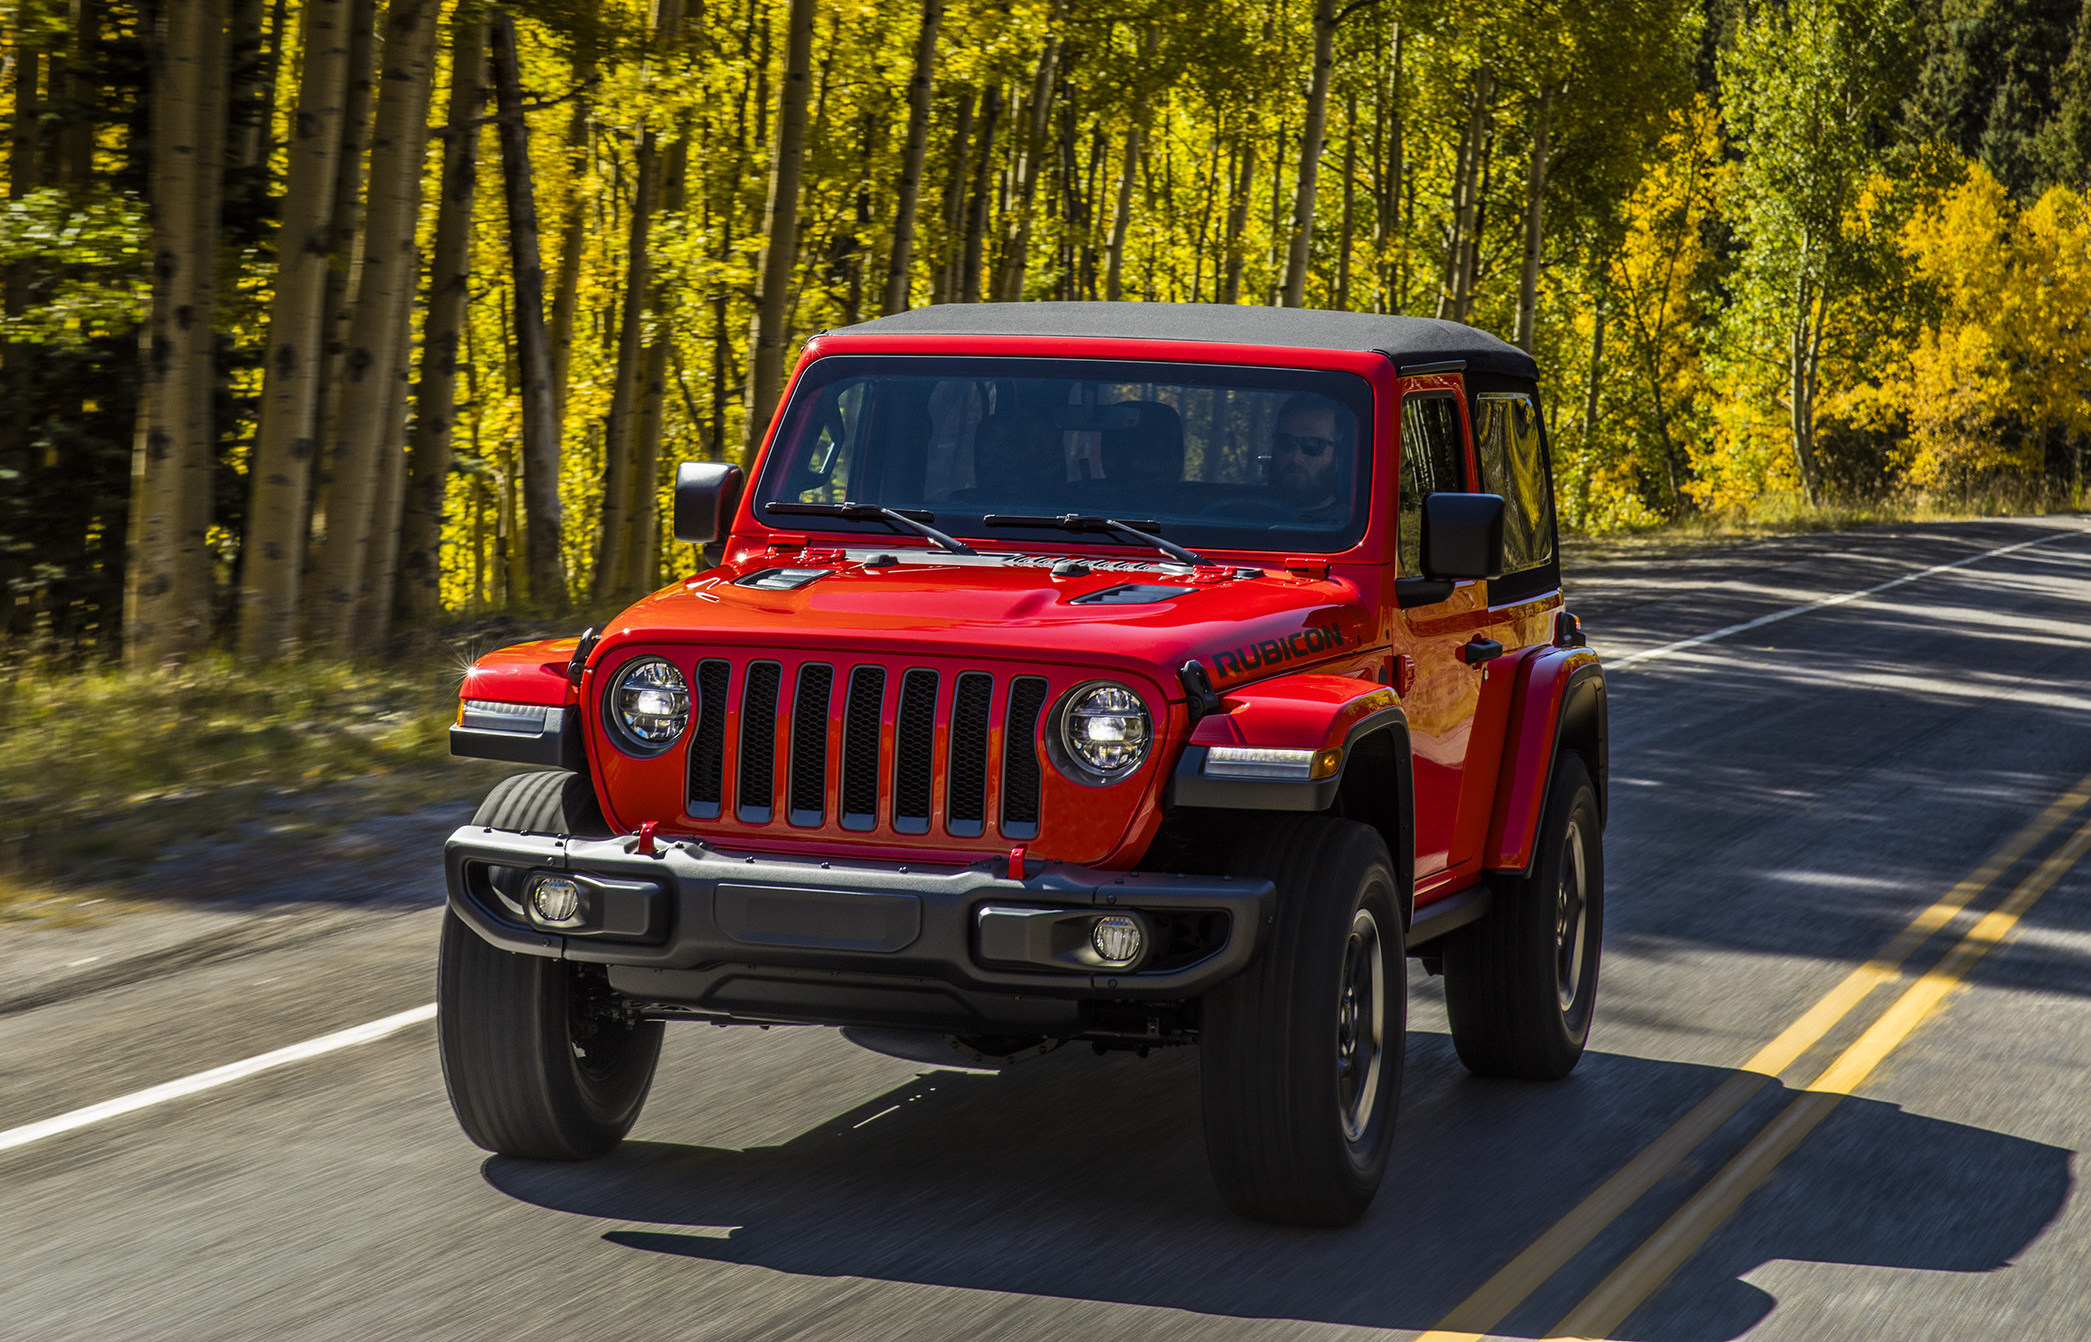 Jeep Wrangler gets upgraded diesel engine with 600Nm